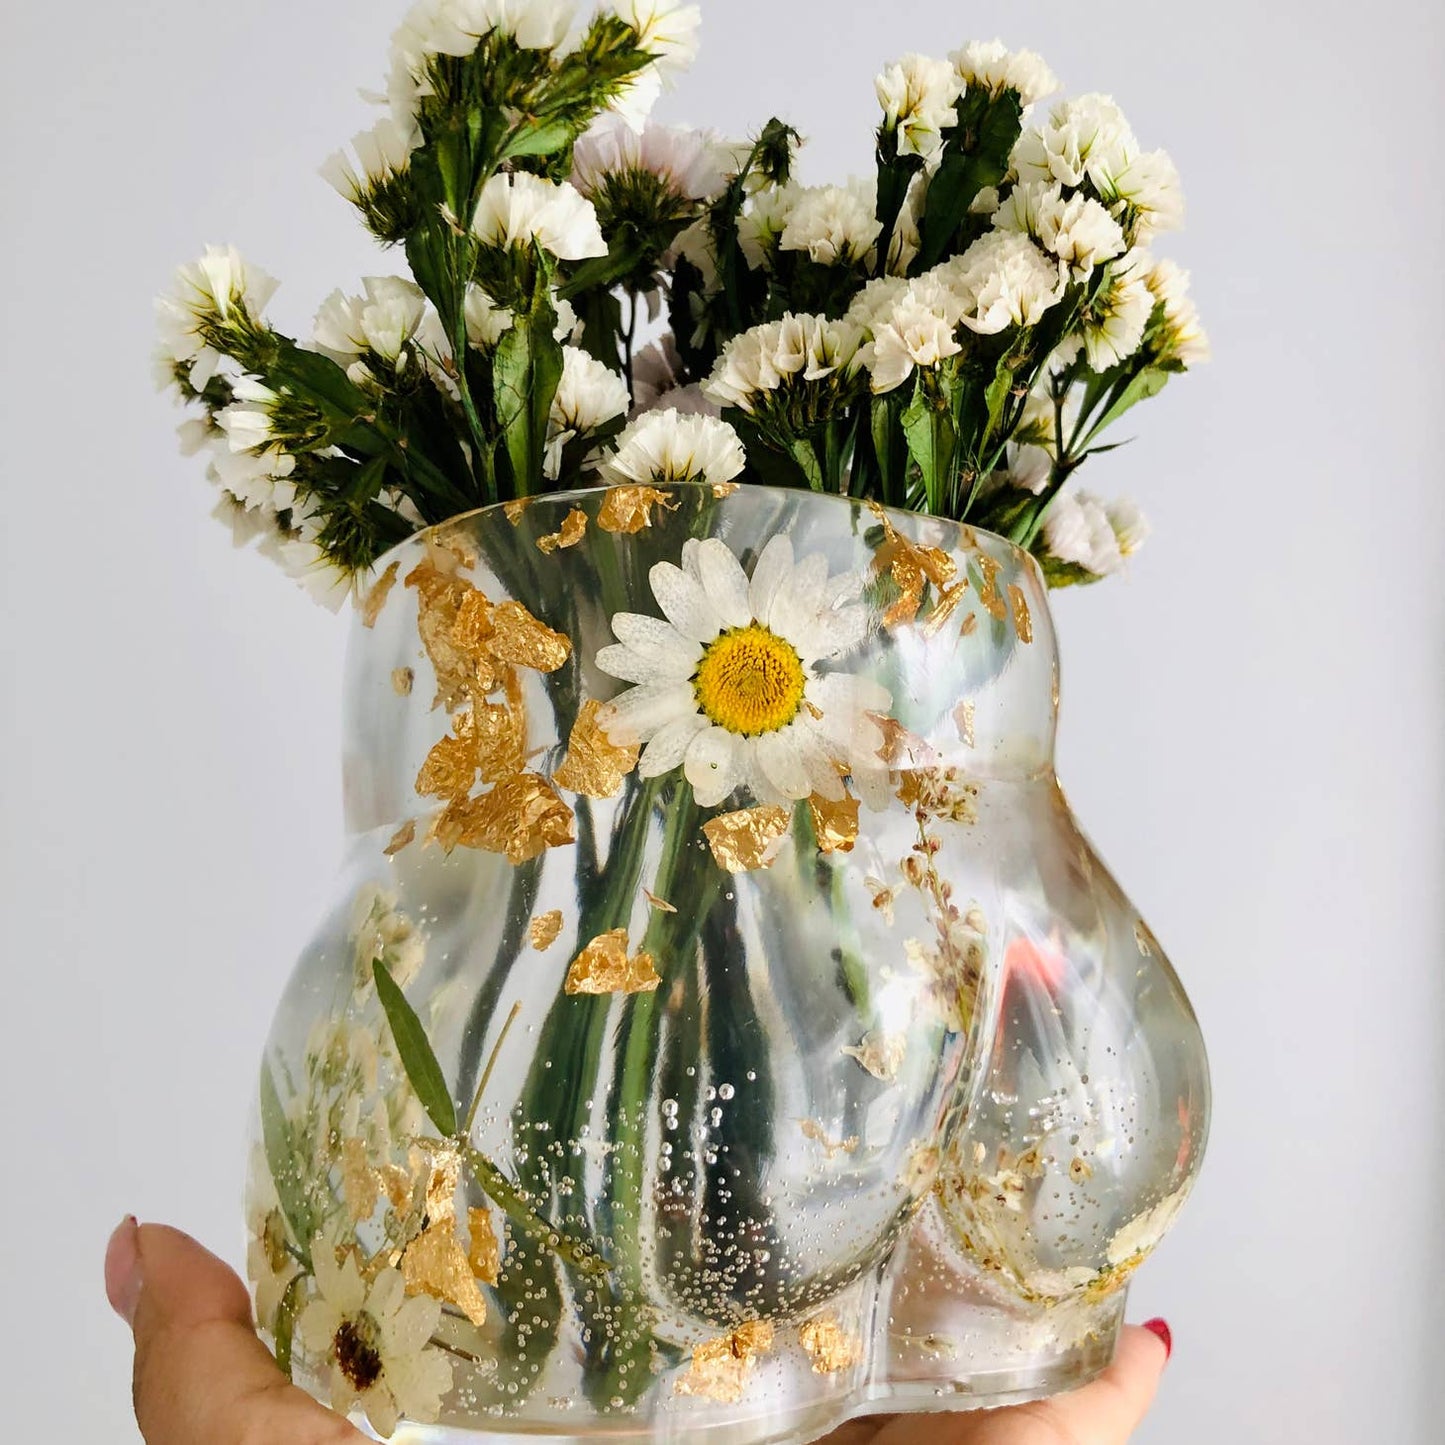 Booty Planter, Resin, Pressed and Dried Flowers